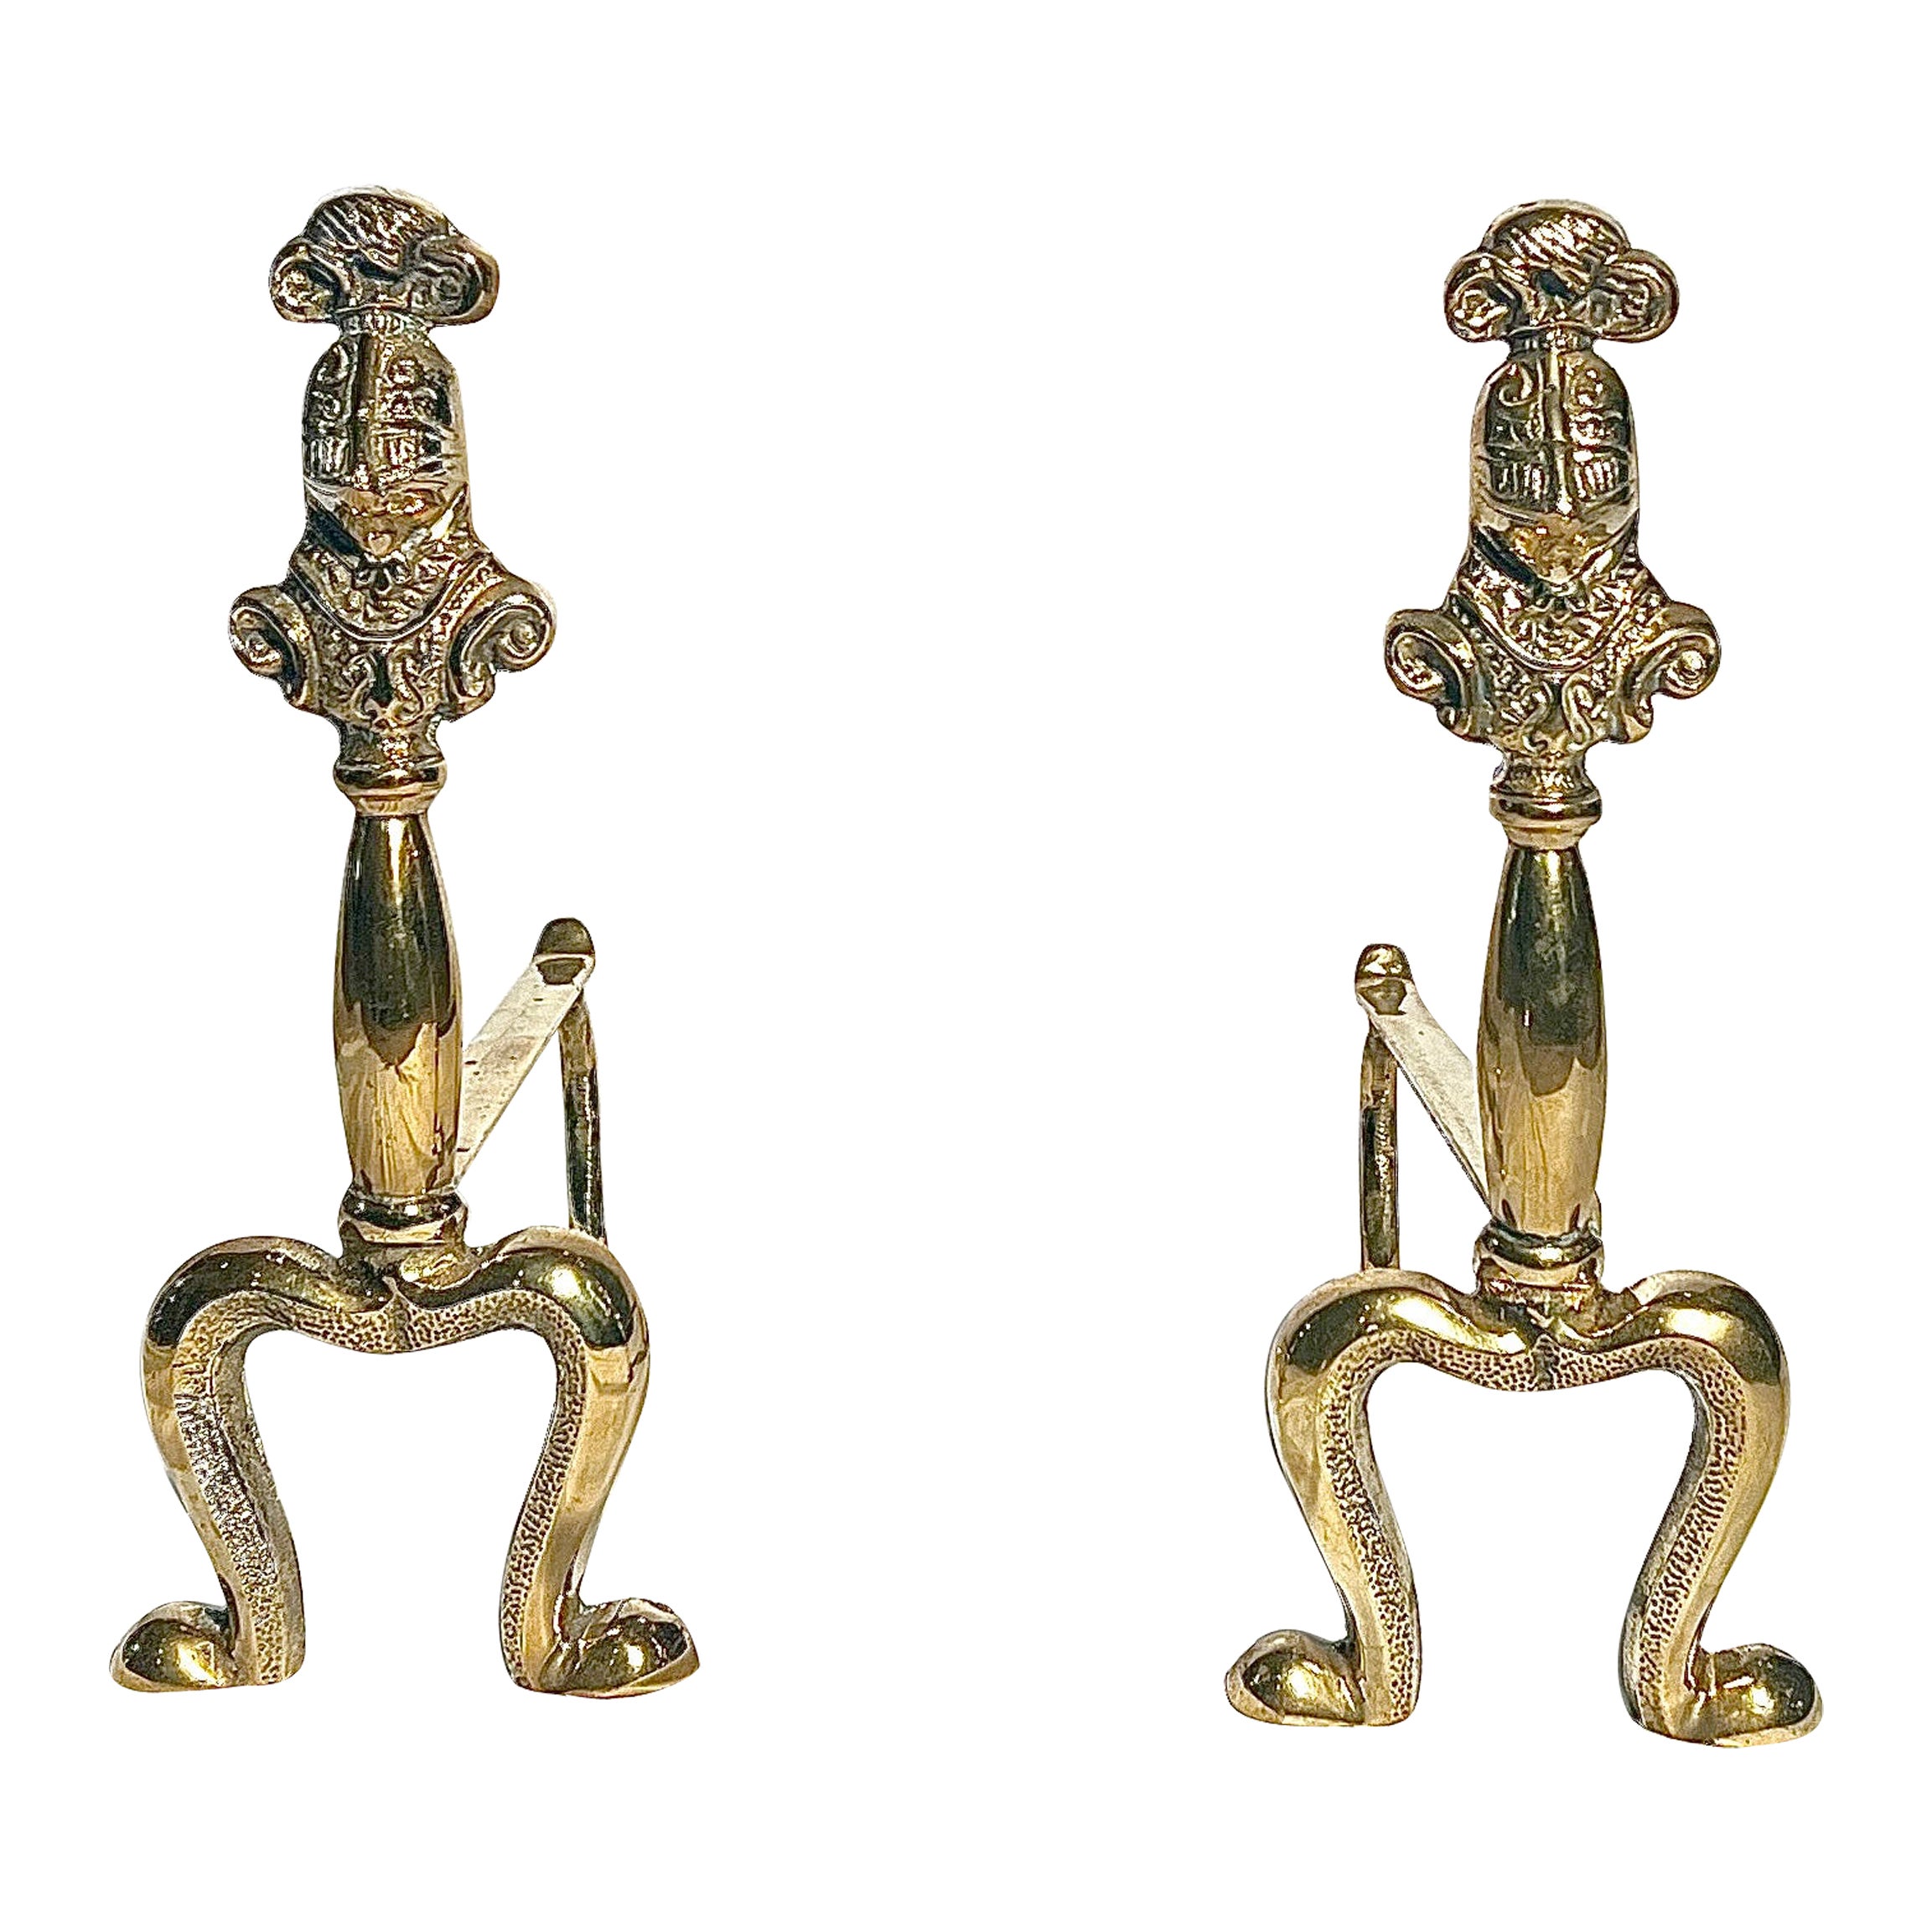 Pair Antique British Victorian Brass "Fire Dogs" or Andirons, Circa 1890's.